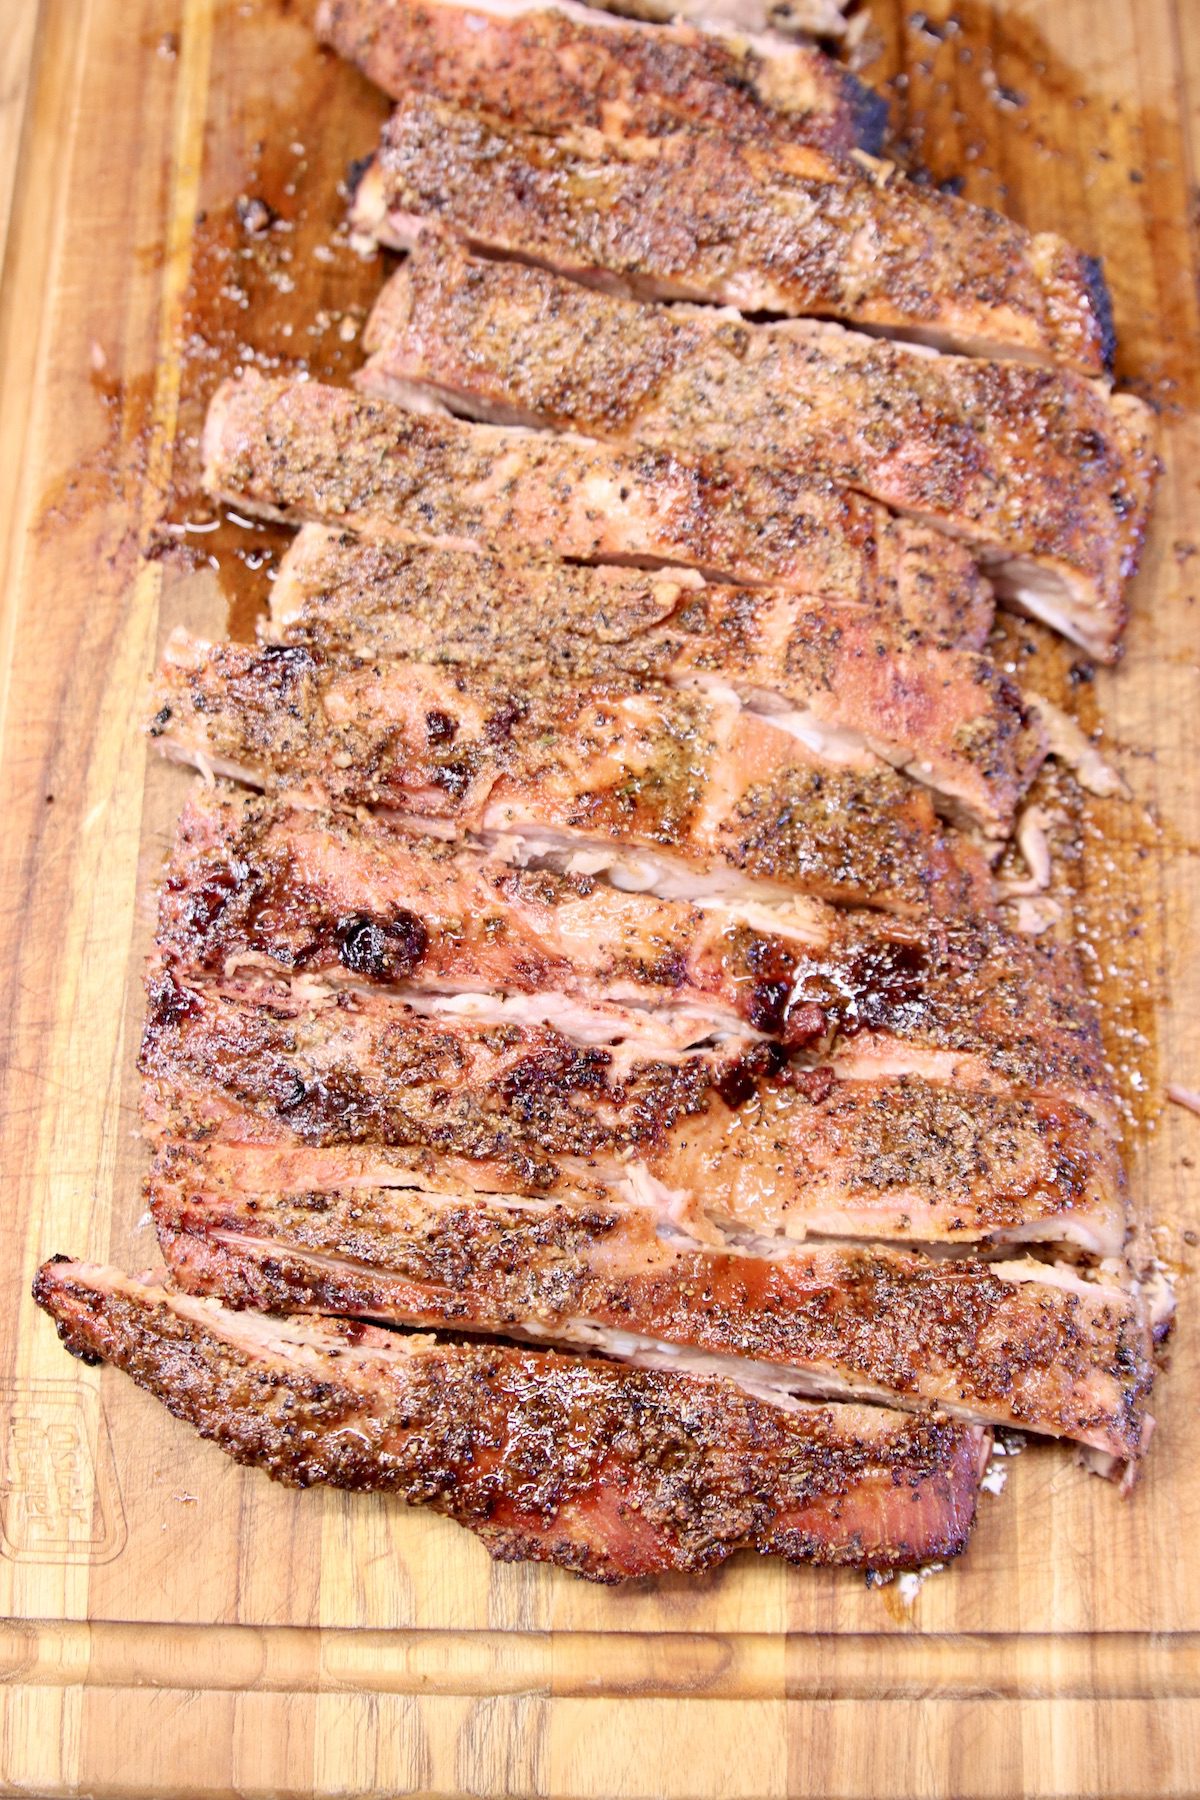 Grilled Spare Ribs sliced